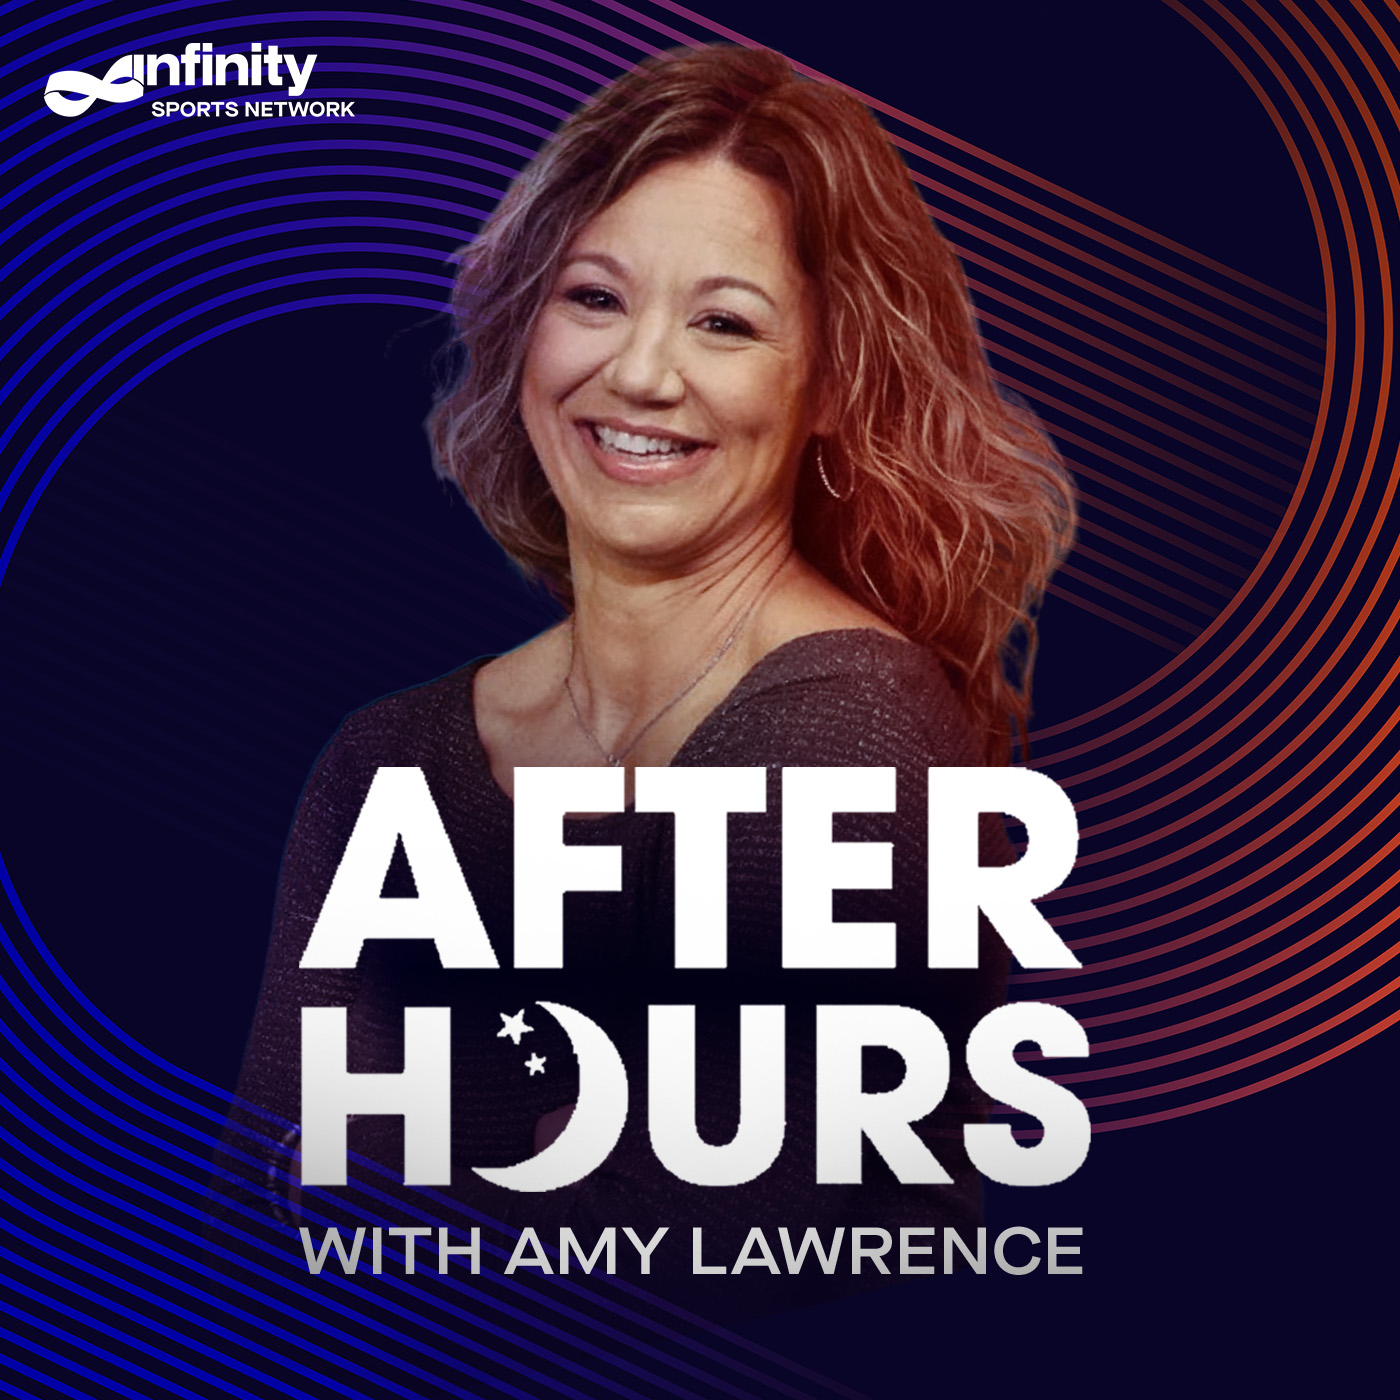 After Hours with Amy Lawrence - Laurence Holmes, 670 TheScore/CBS Sports Radio Host